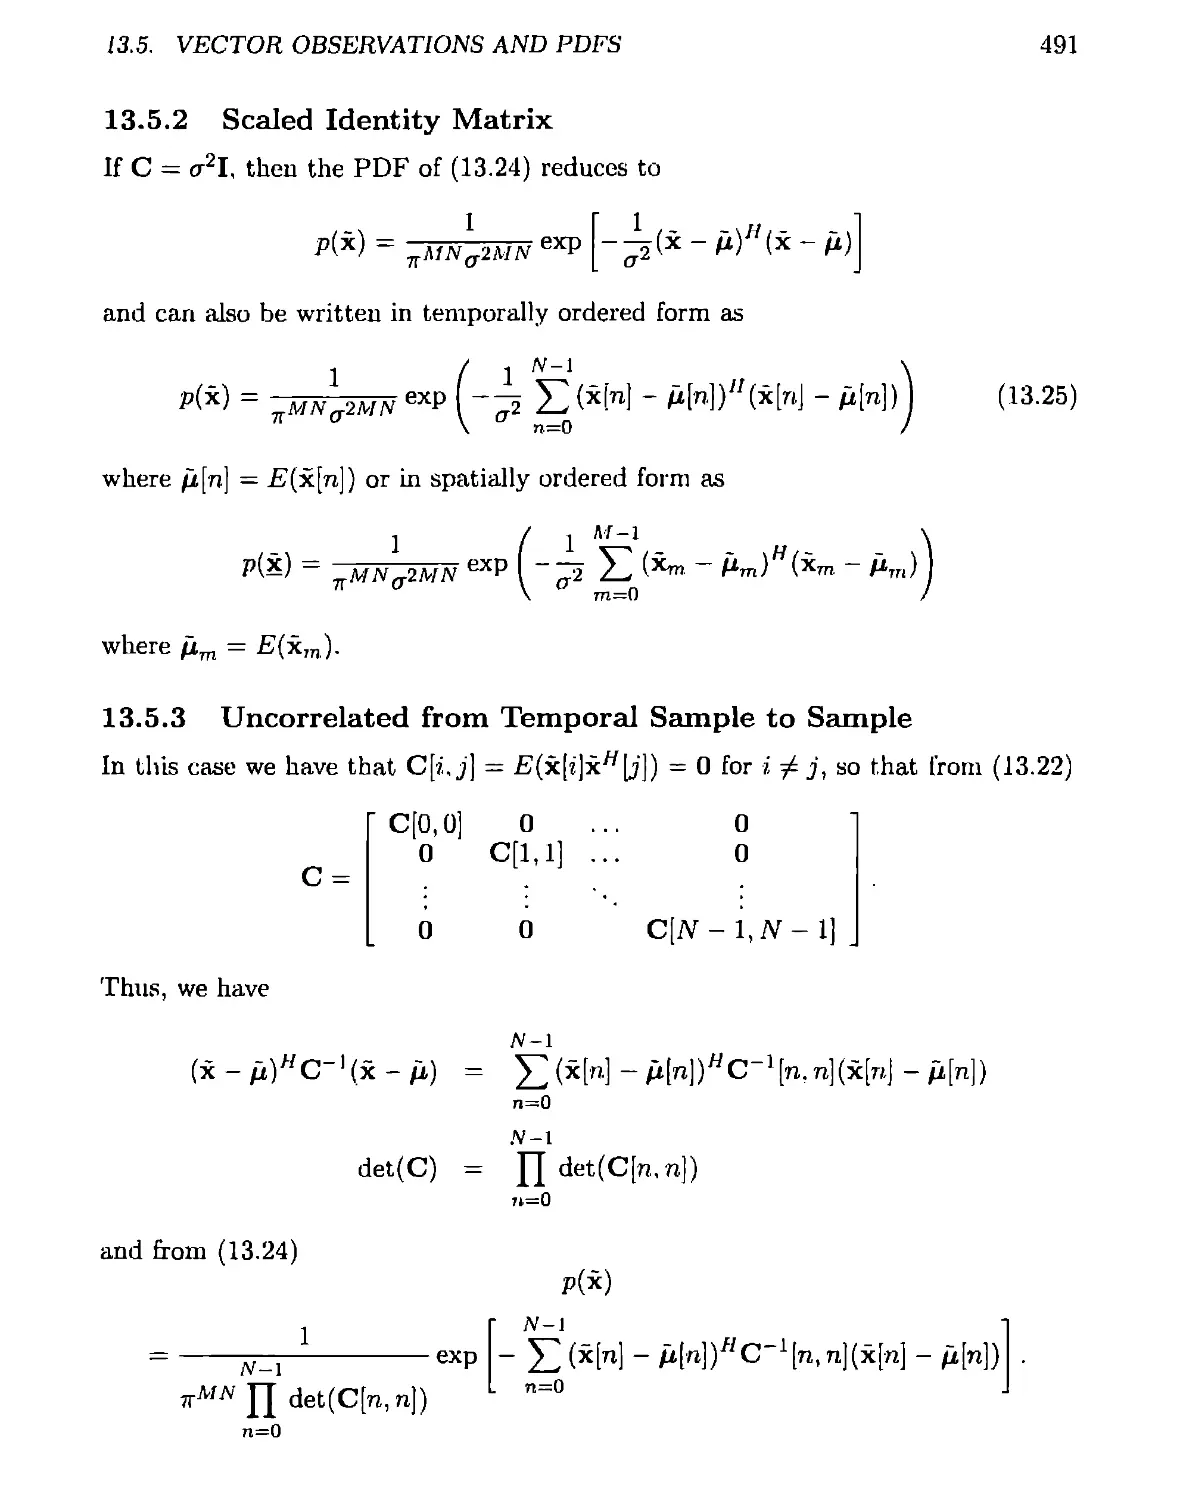 13.5.2 Scaled Identity Matrix
13.5.3 Uncorrelated from Temporal Sample to Sample